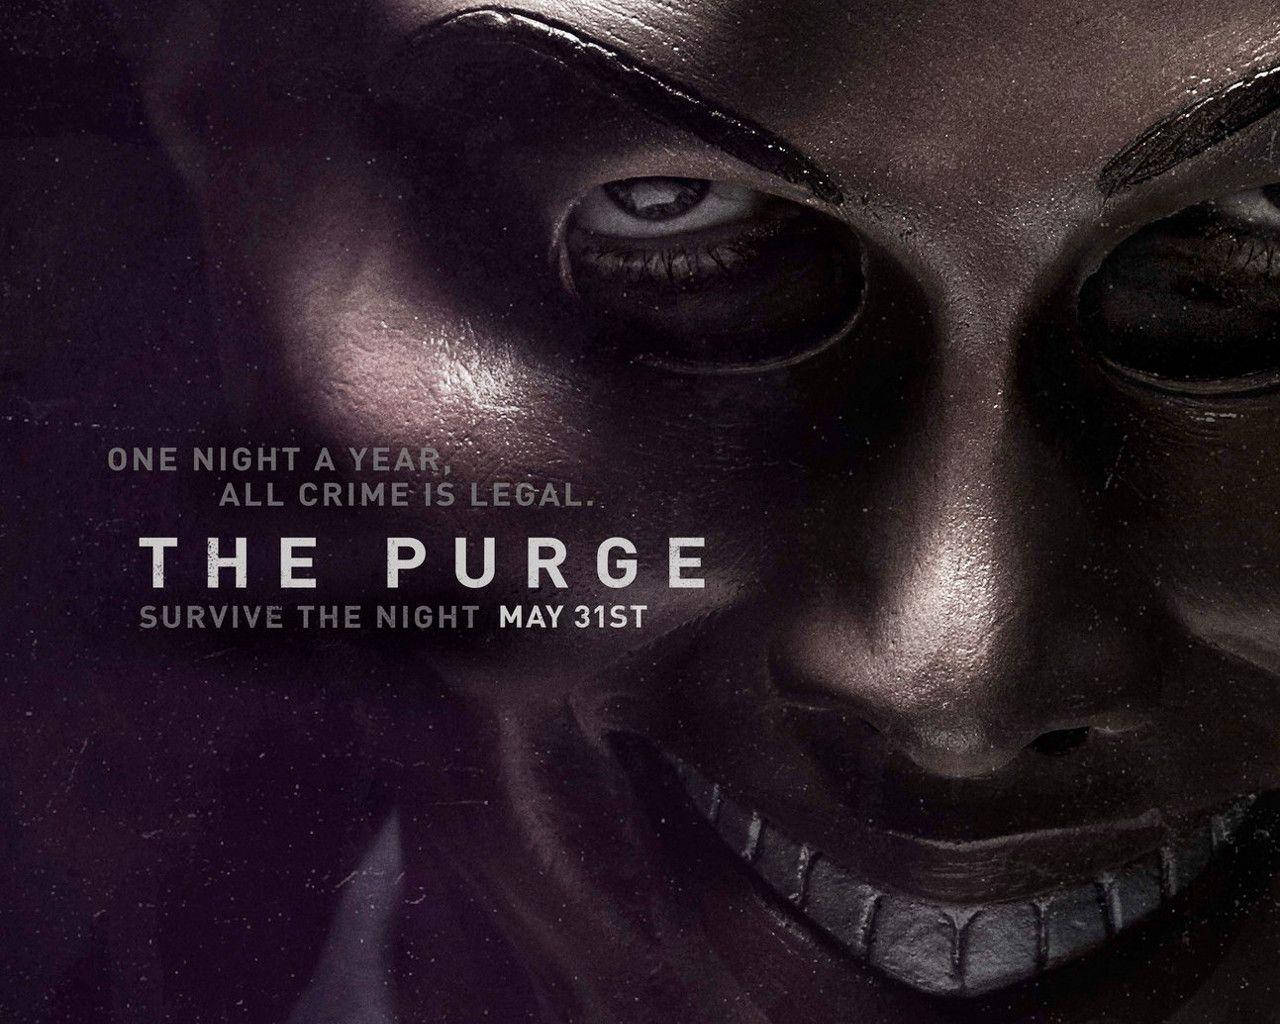 The Purge Movie Poster Wallpaper